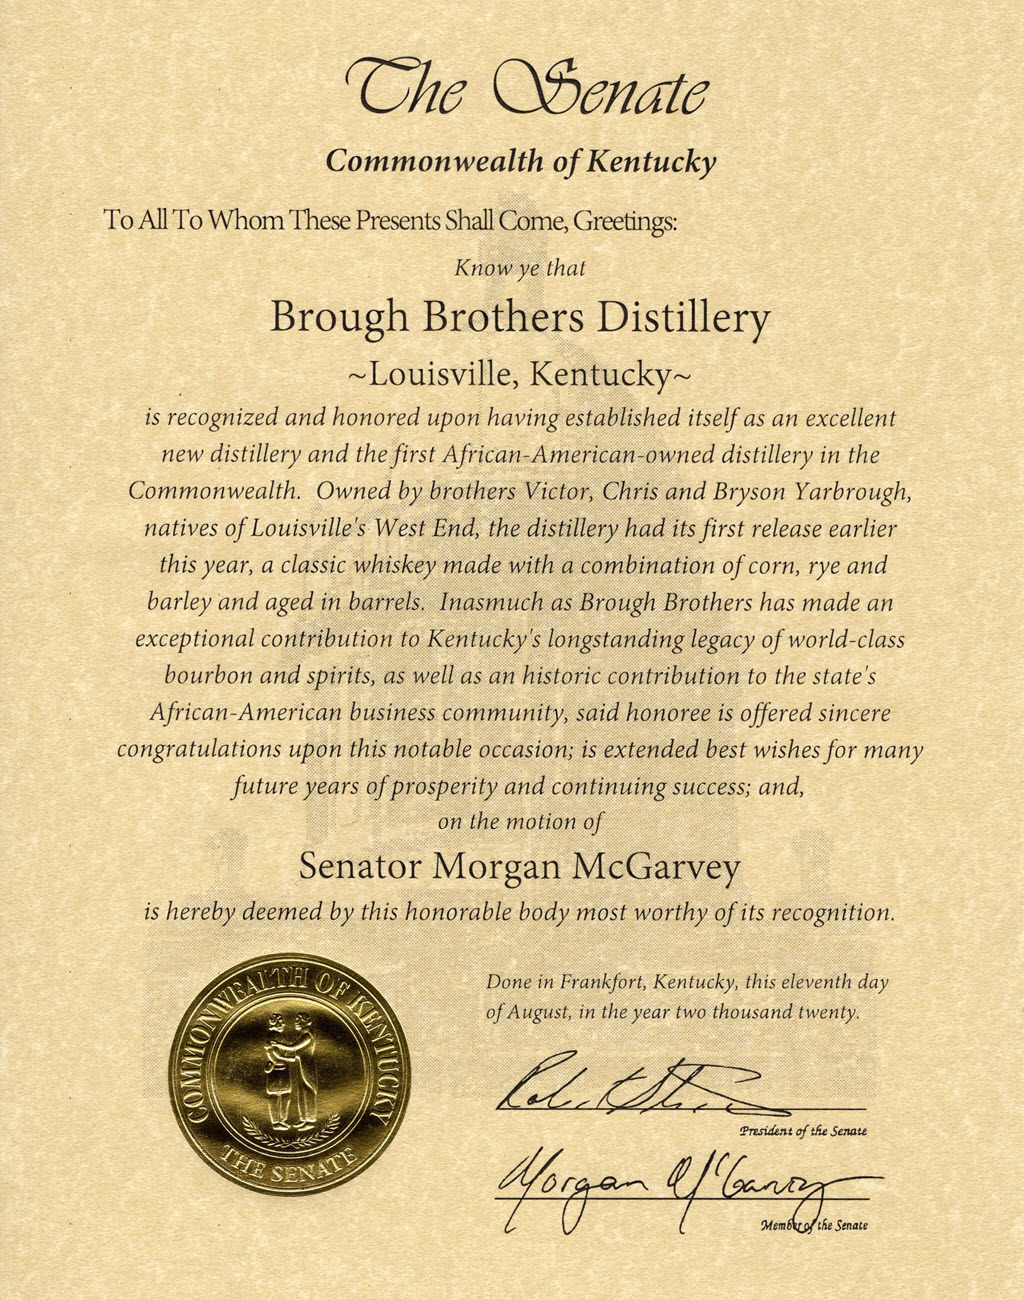 Kentucky State Senate Recognizing Brough Brothers as the First African-American Distillery in Kentucky